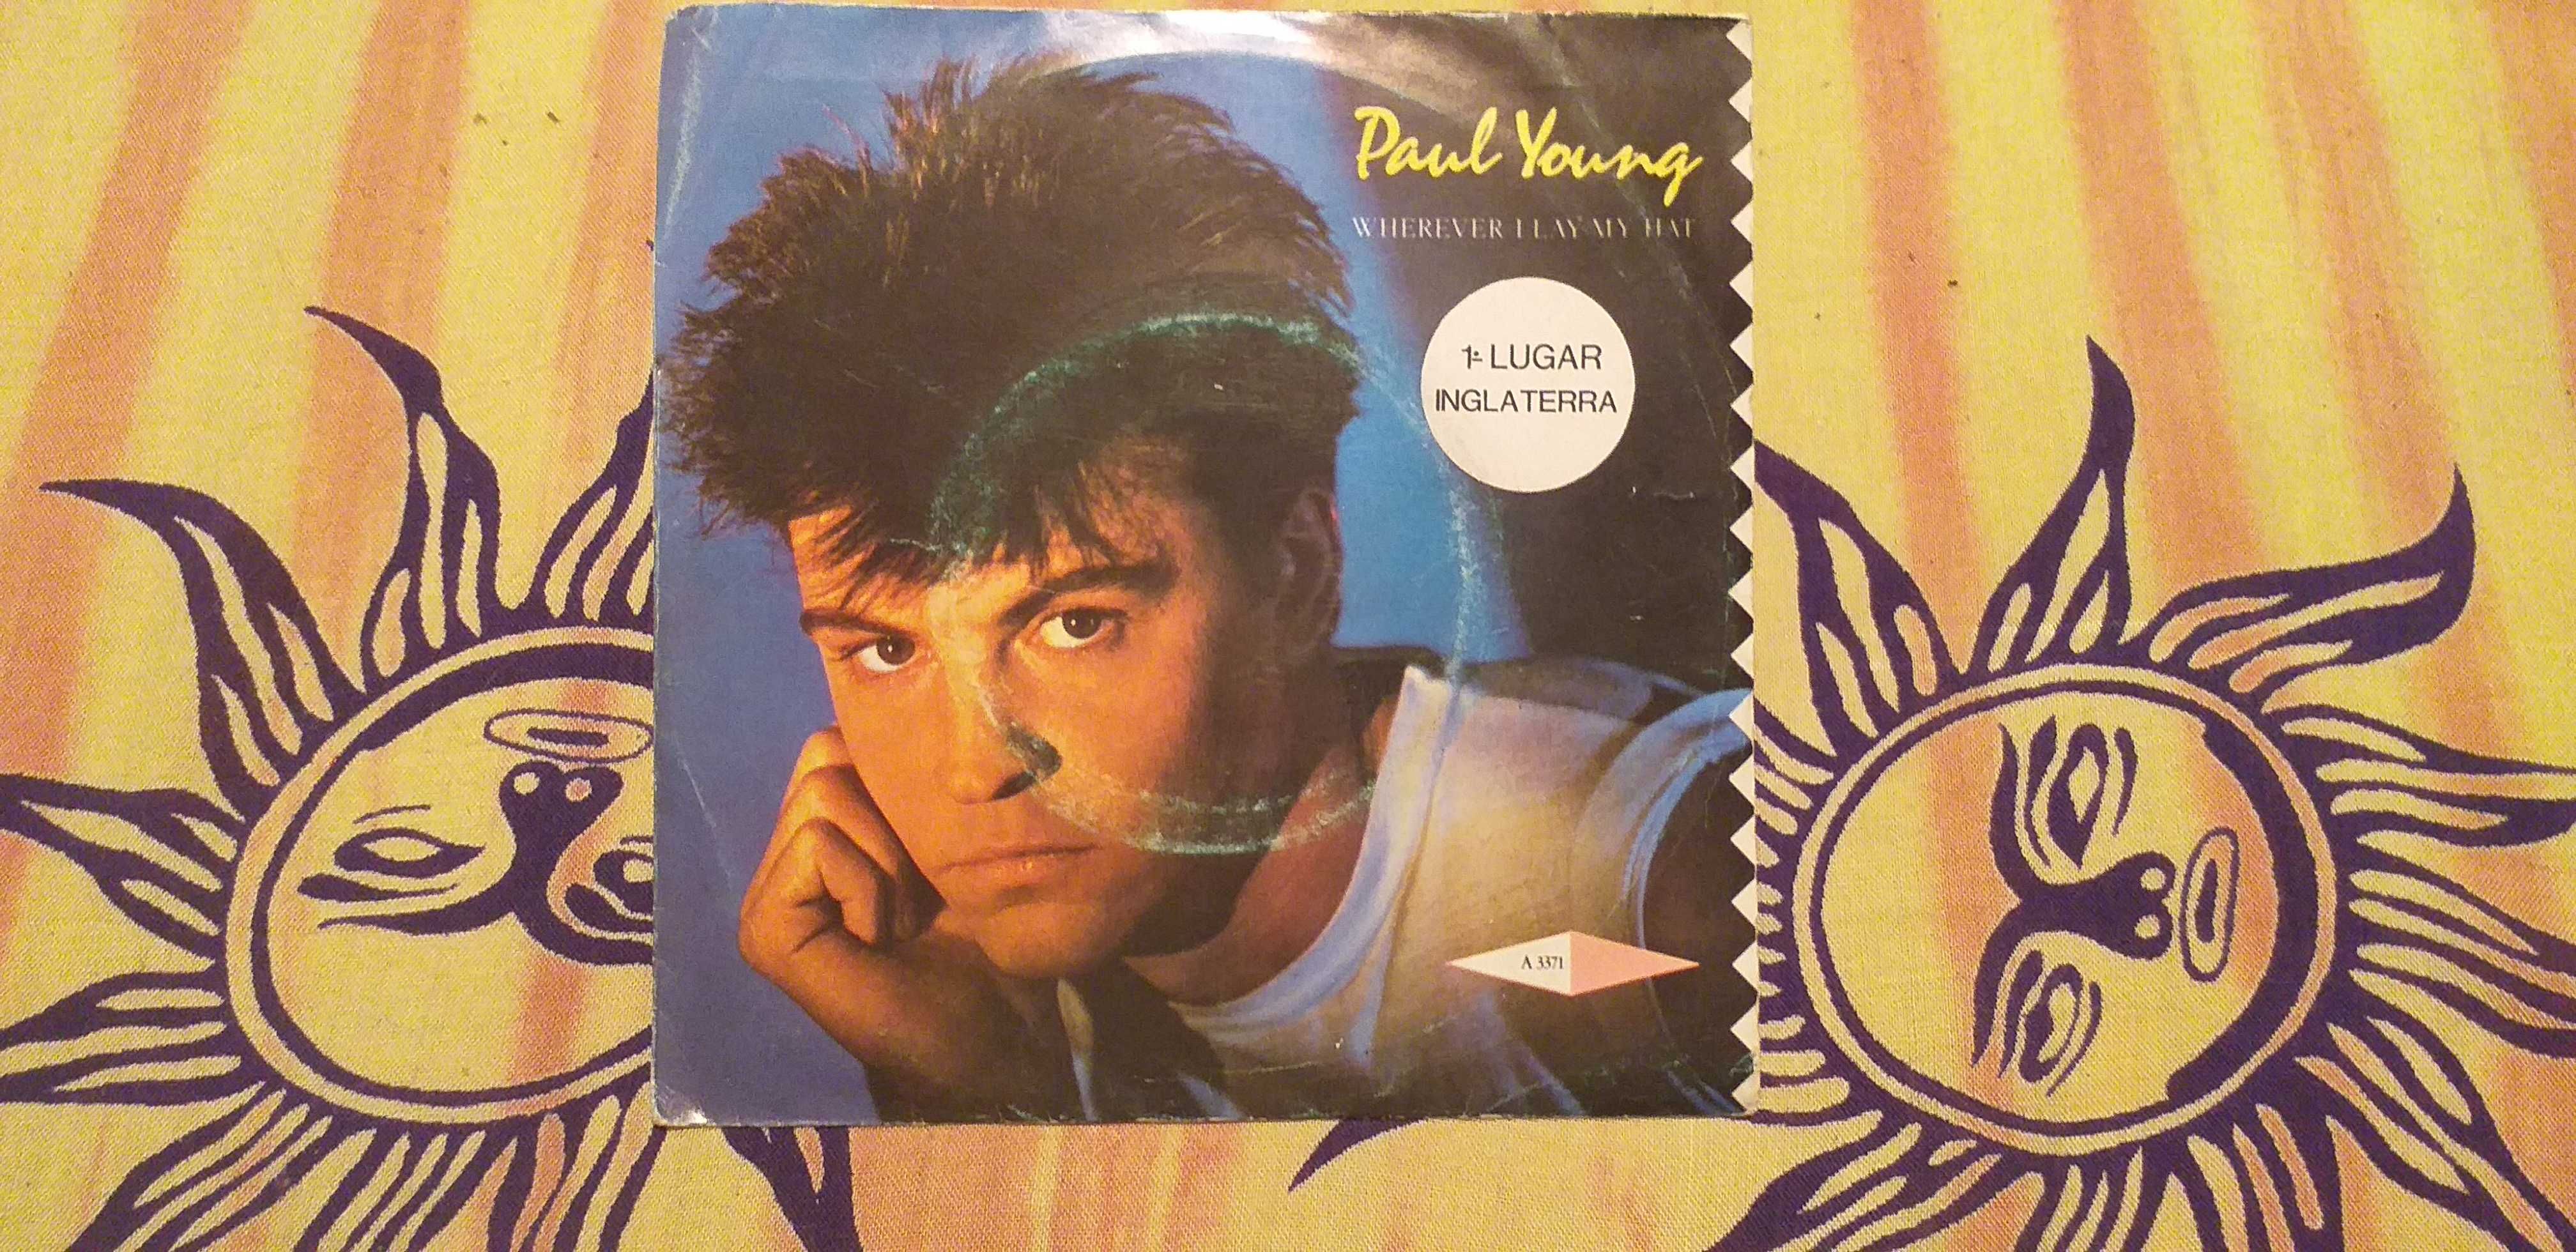 Paul Young - Whenever i lay my hat ( that's my home ) - single